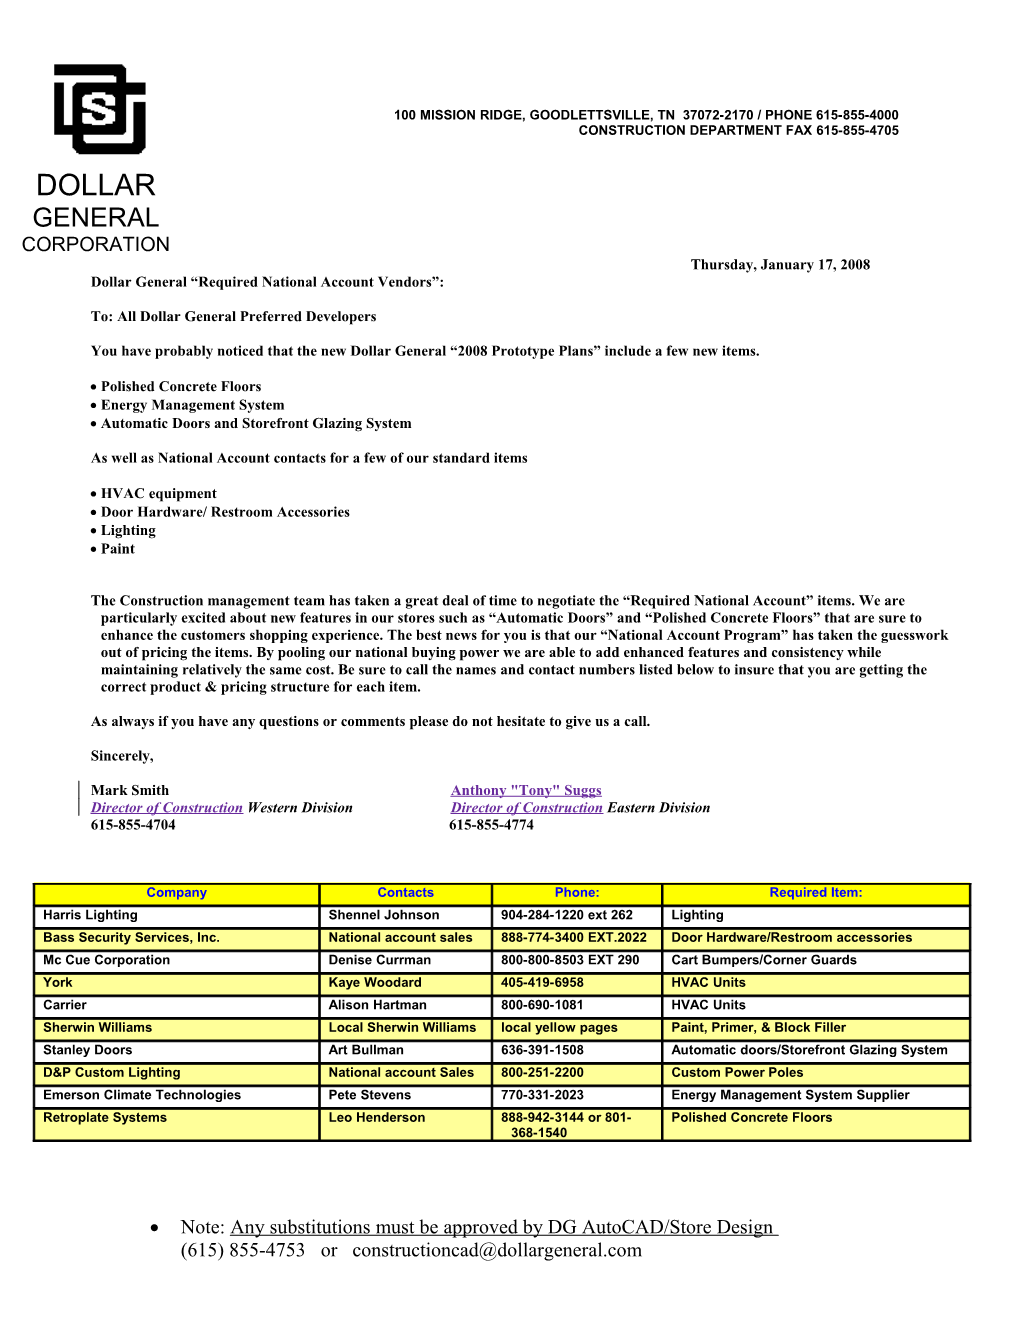 Dollar General Required National Account Vendors